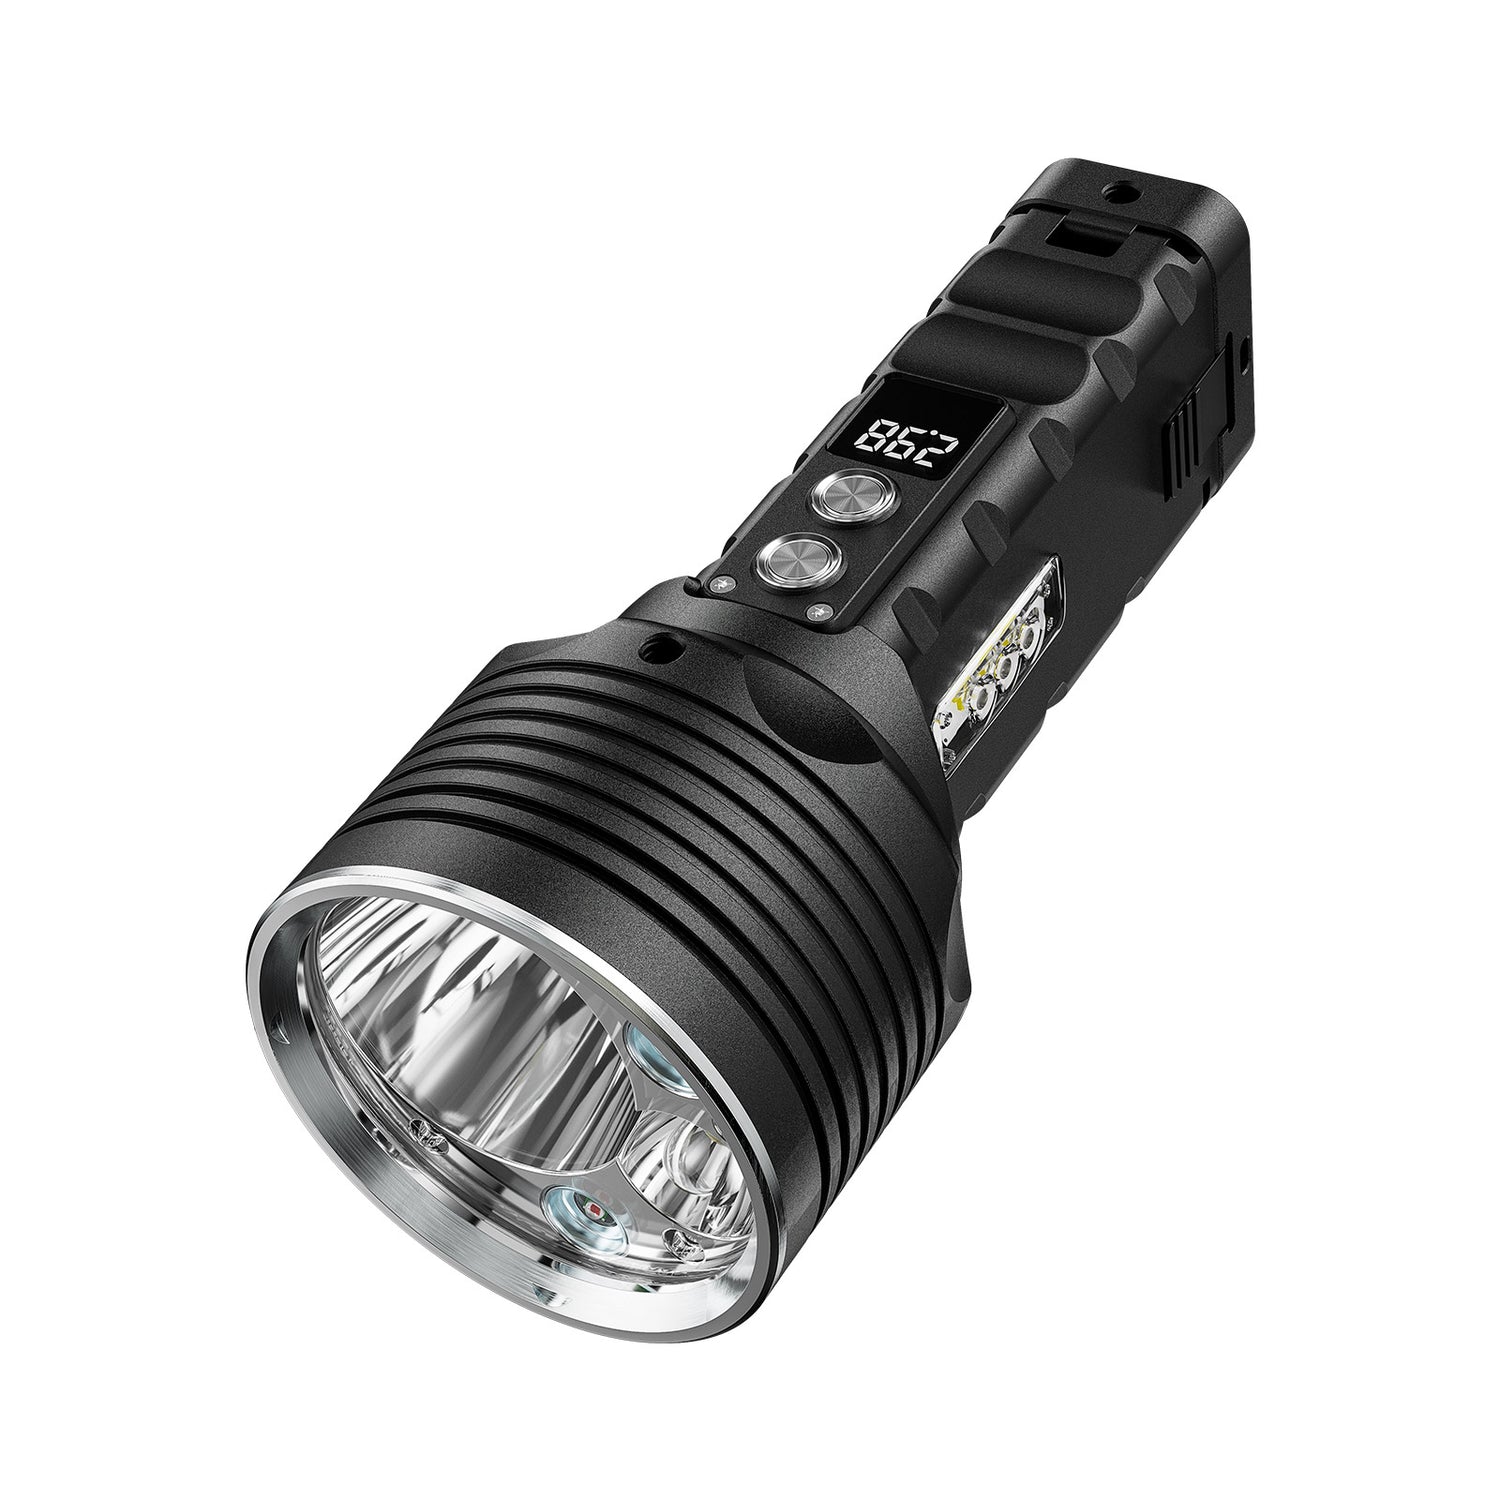 Search & Tactical Flashlights